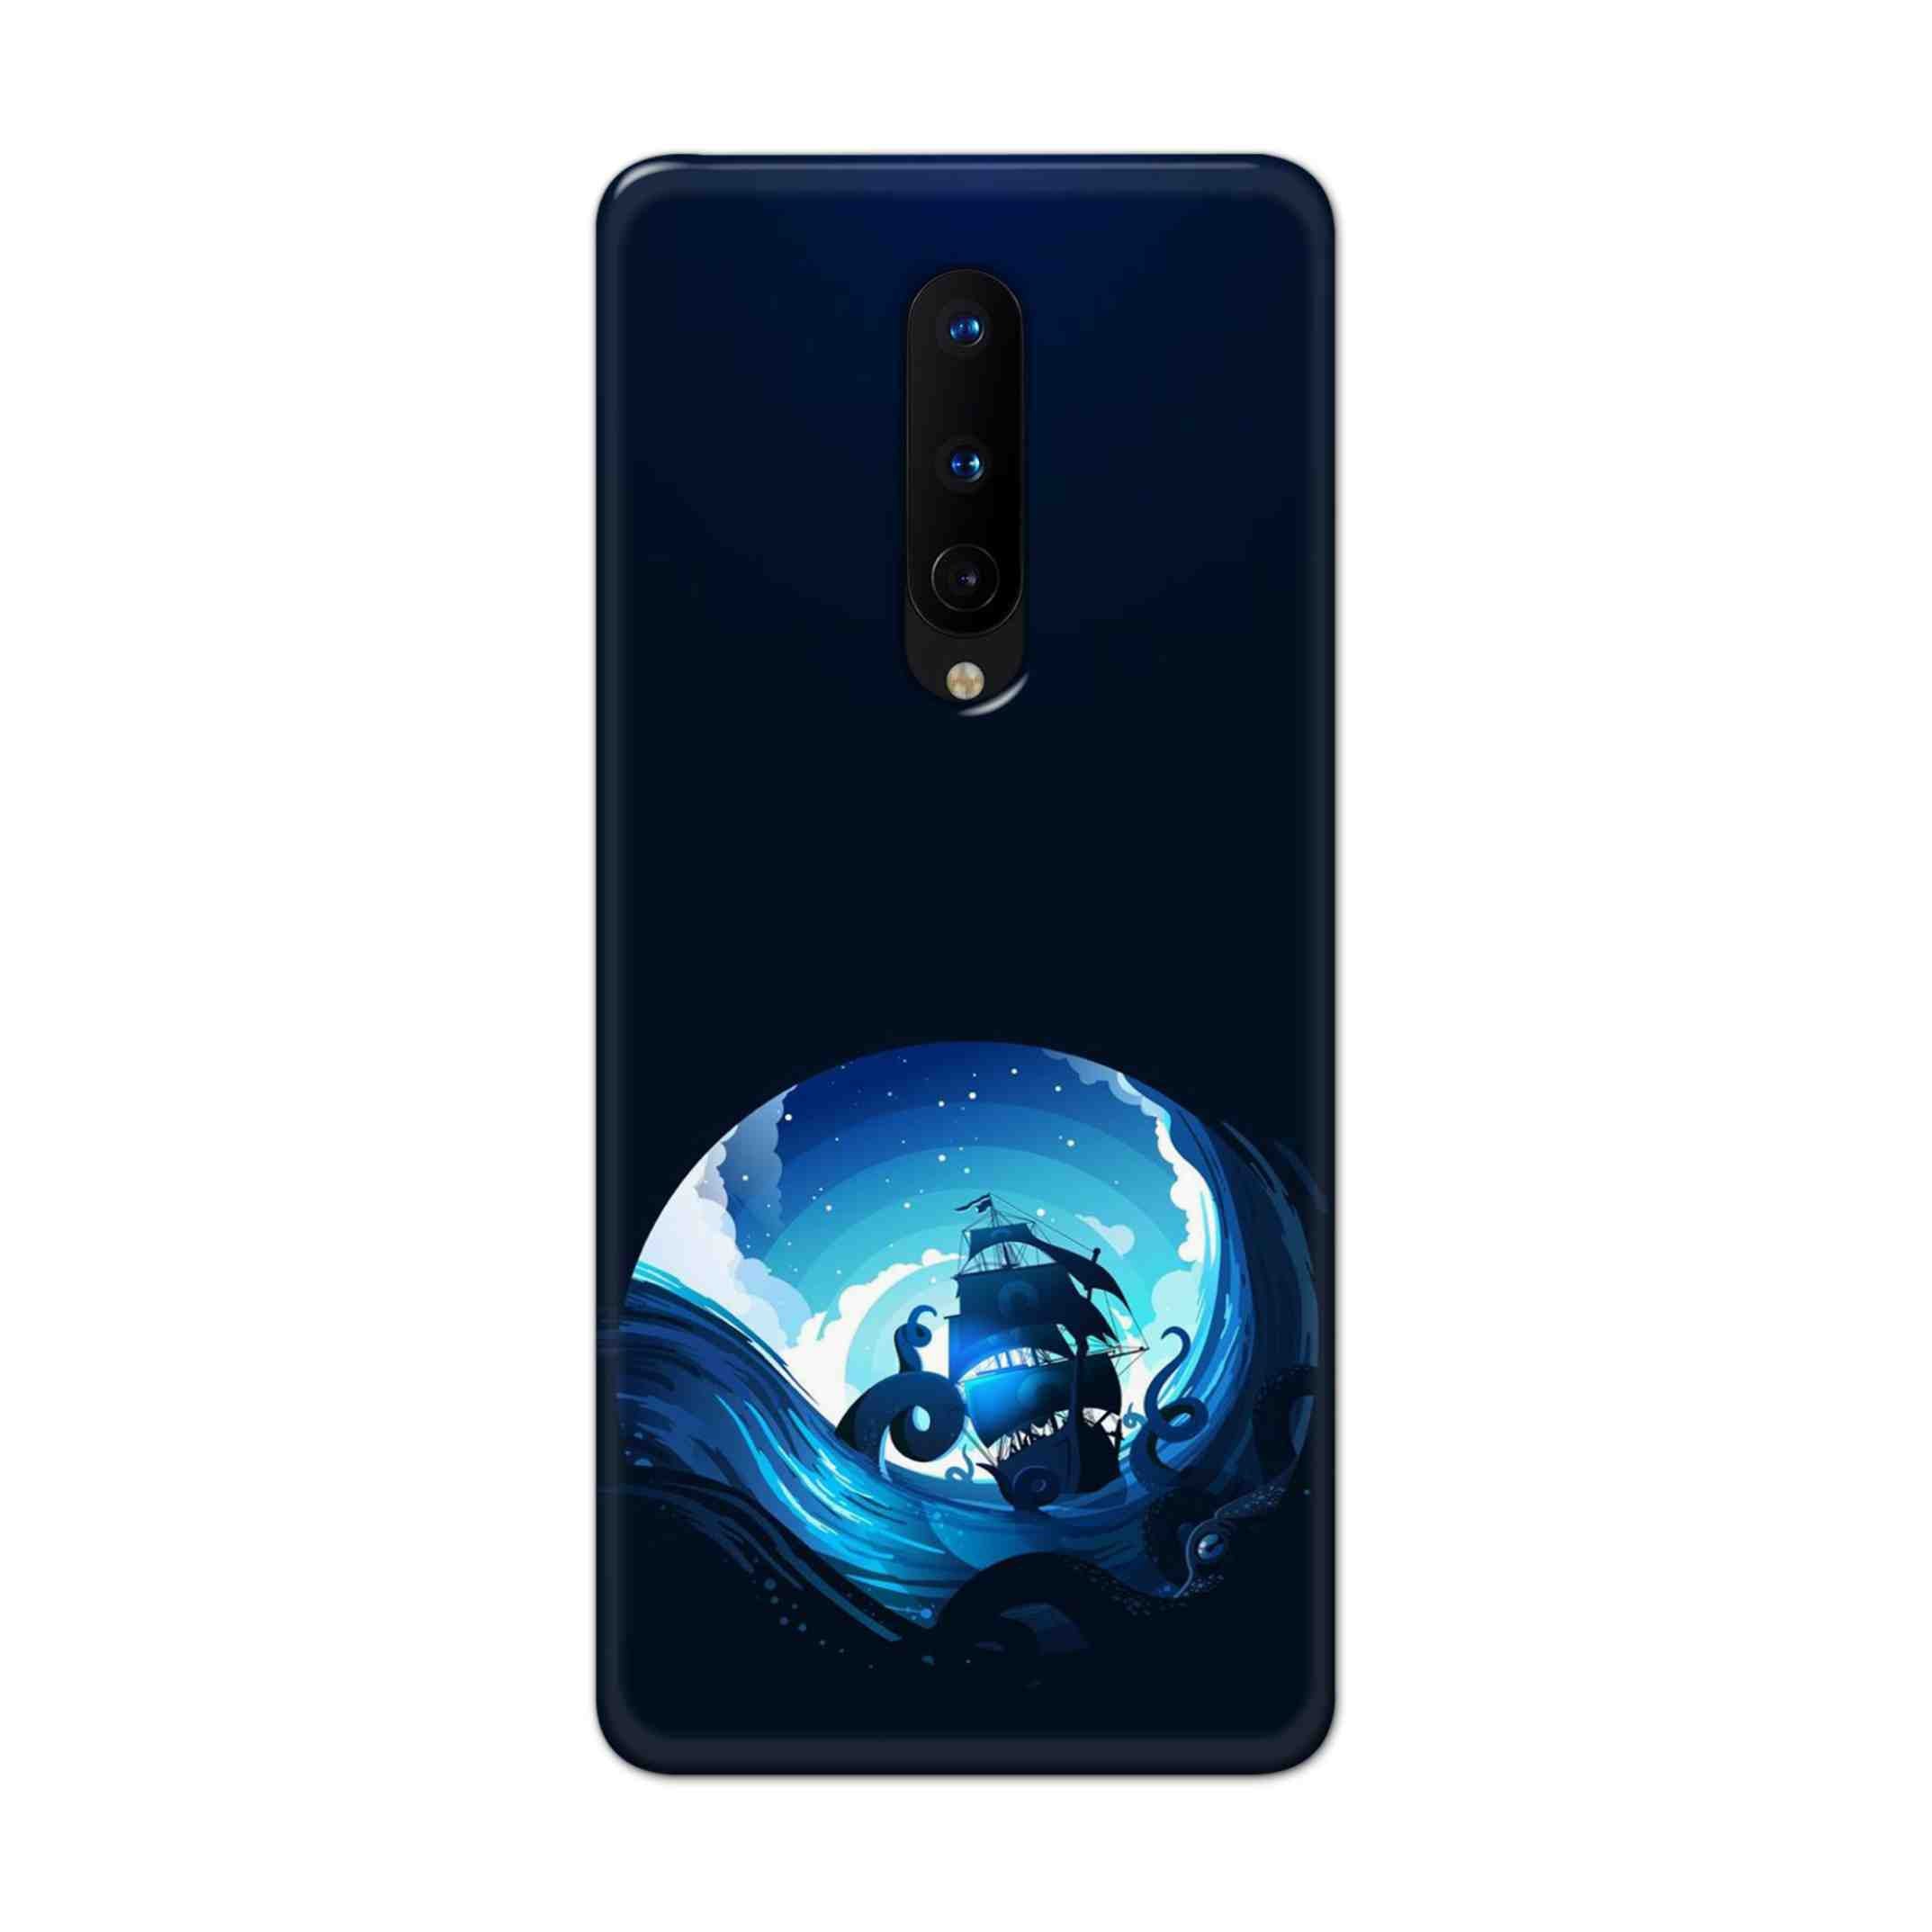 Buy Blue Sea Ship Hard Back Mobile Phone Case Cover For OnePlus 8 Online